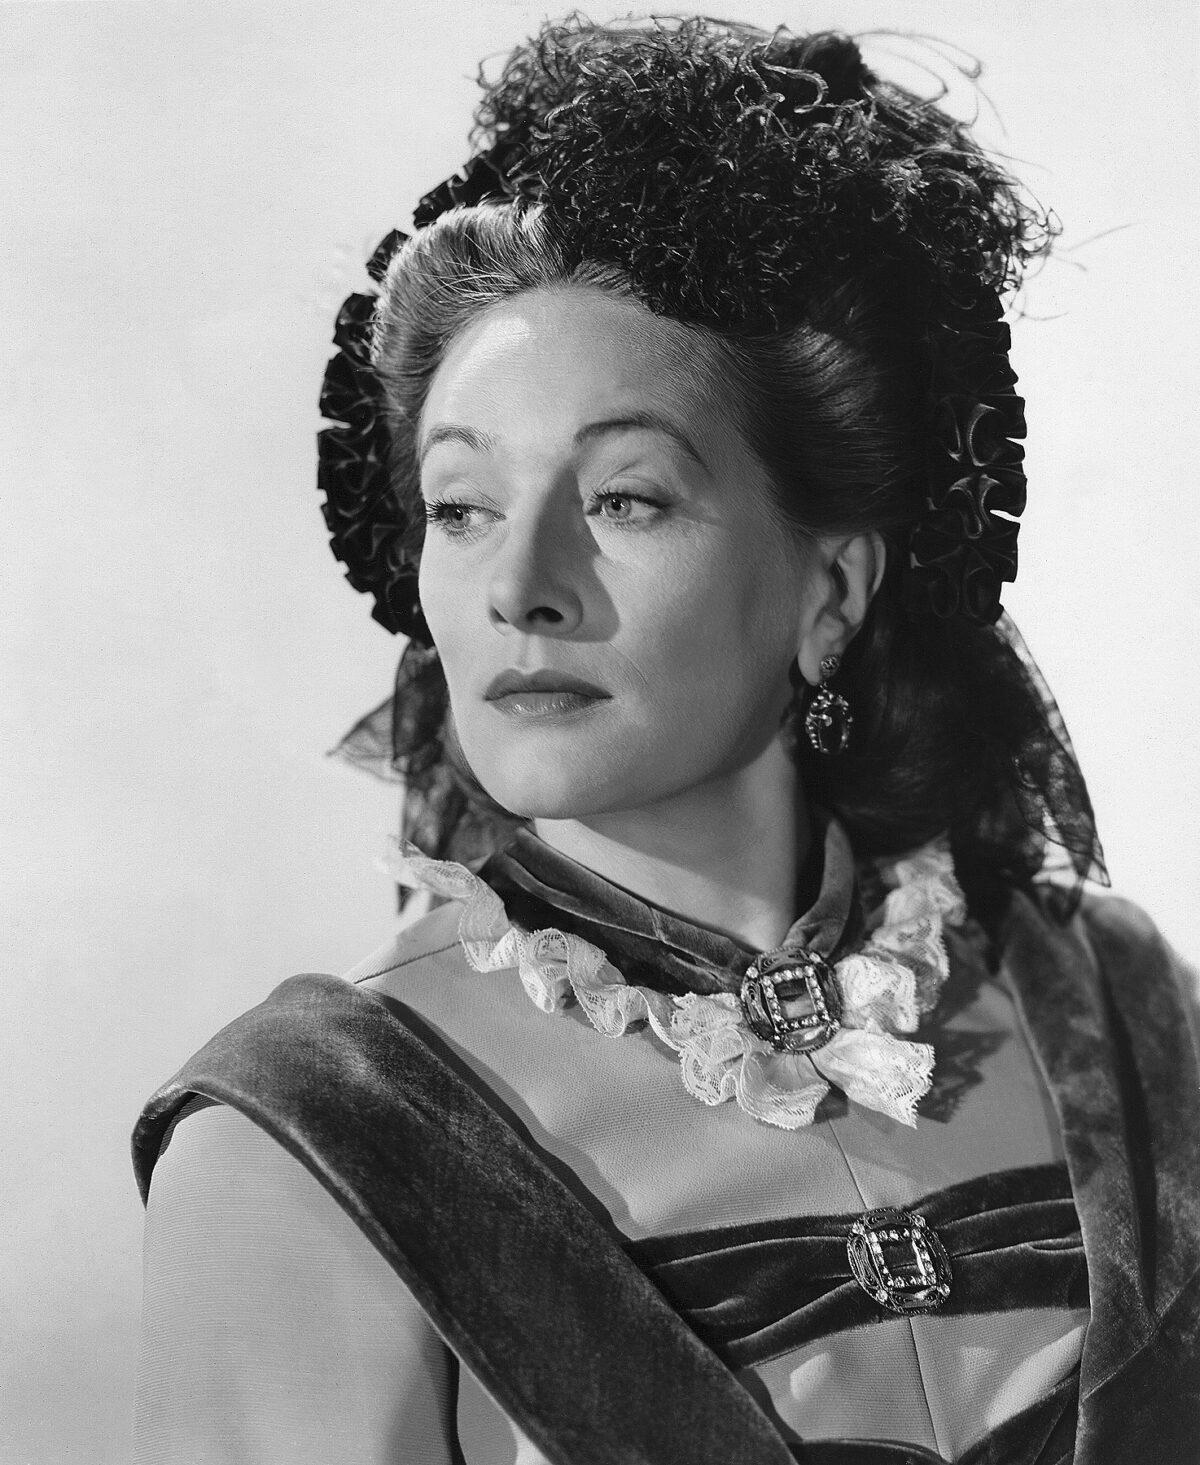 Publicity still of Tala Birell in the film "The Song of Bernadette" from 1943. (Public Domain)